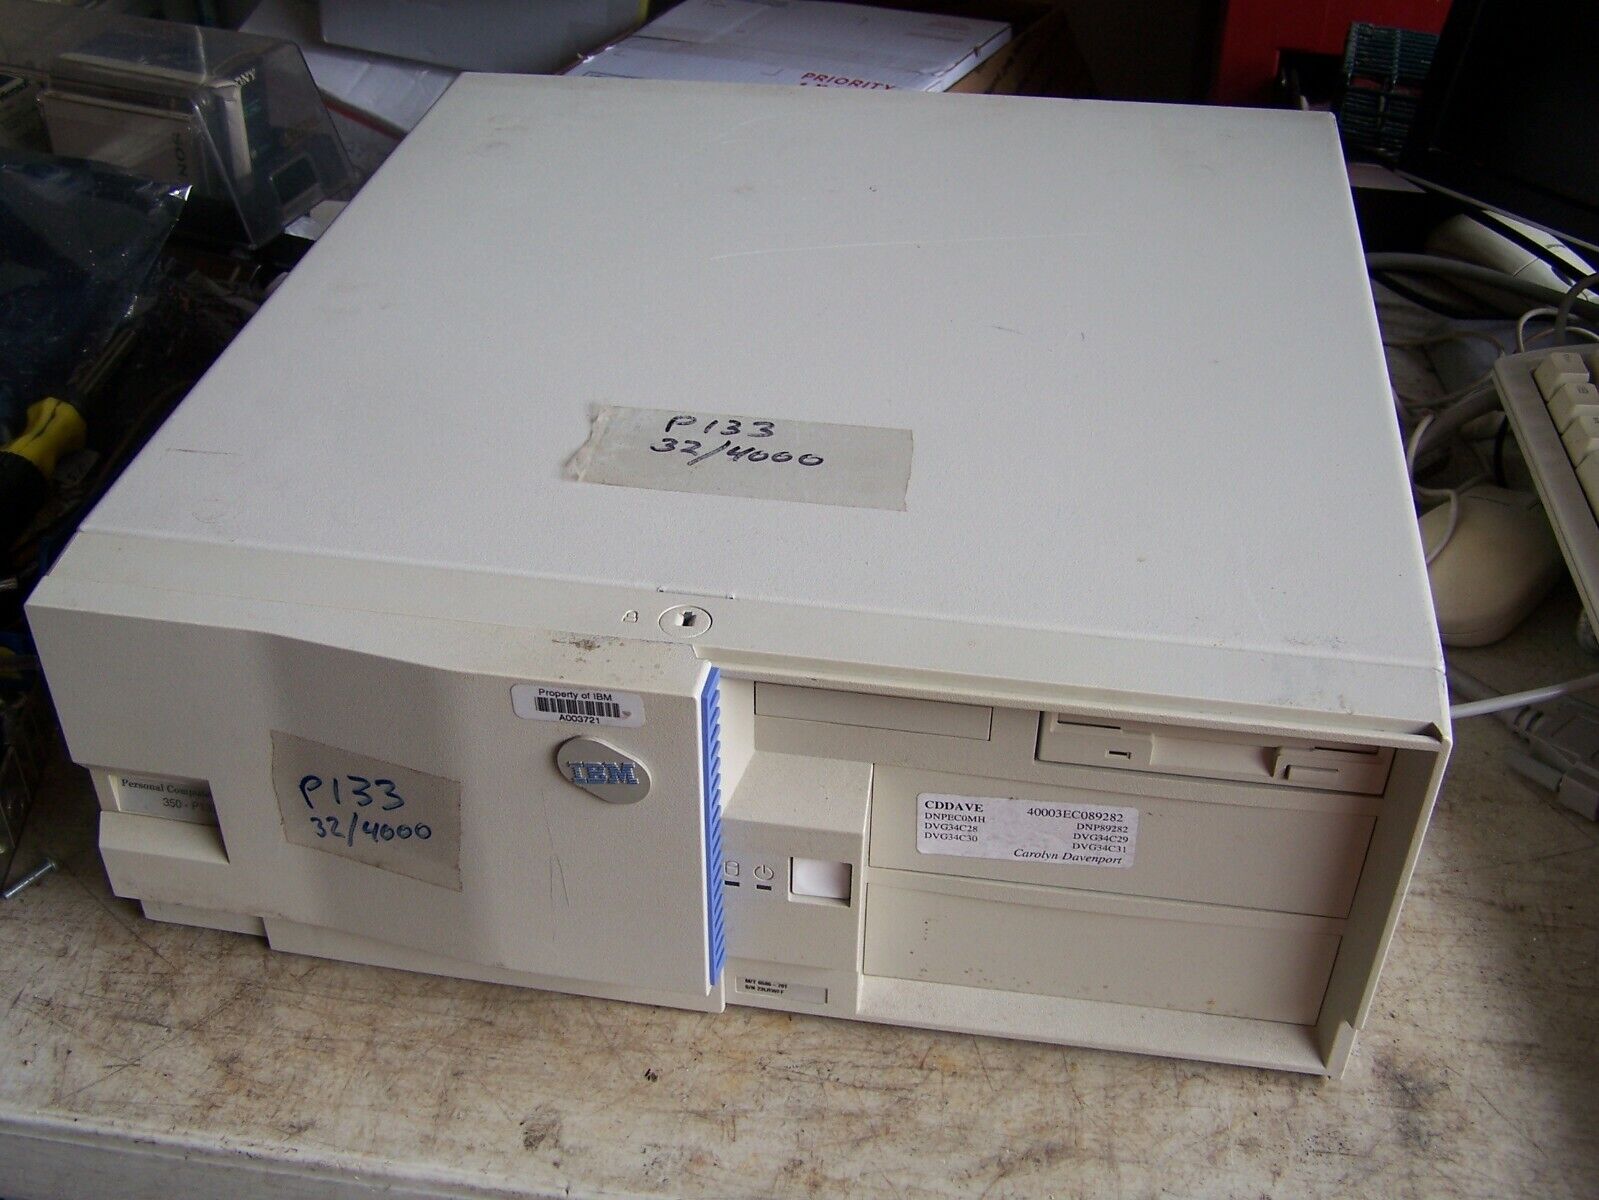 IBM Personal Computer 350-P133 Type 6586 Model 79T  - Estate Sale SOLD AS IS